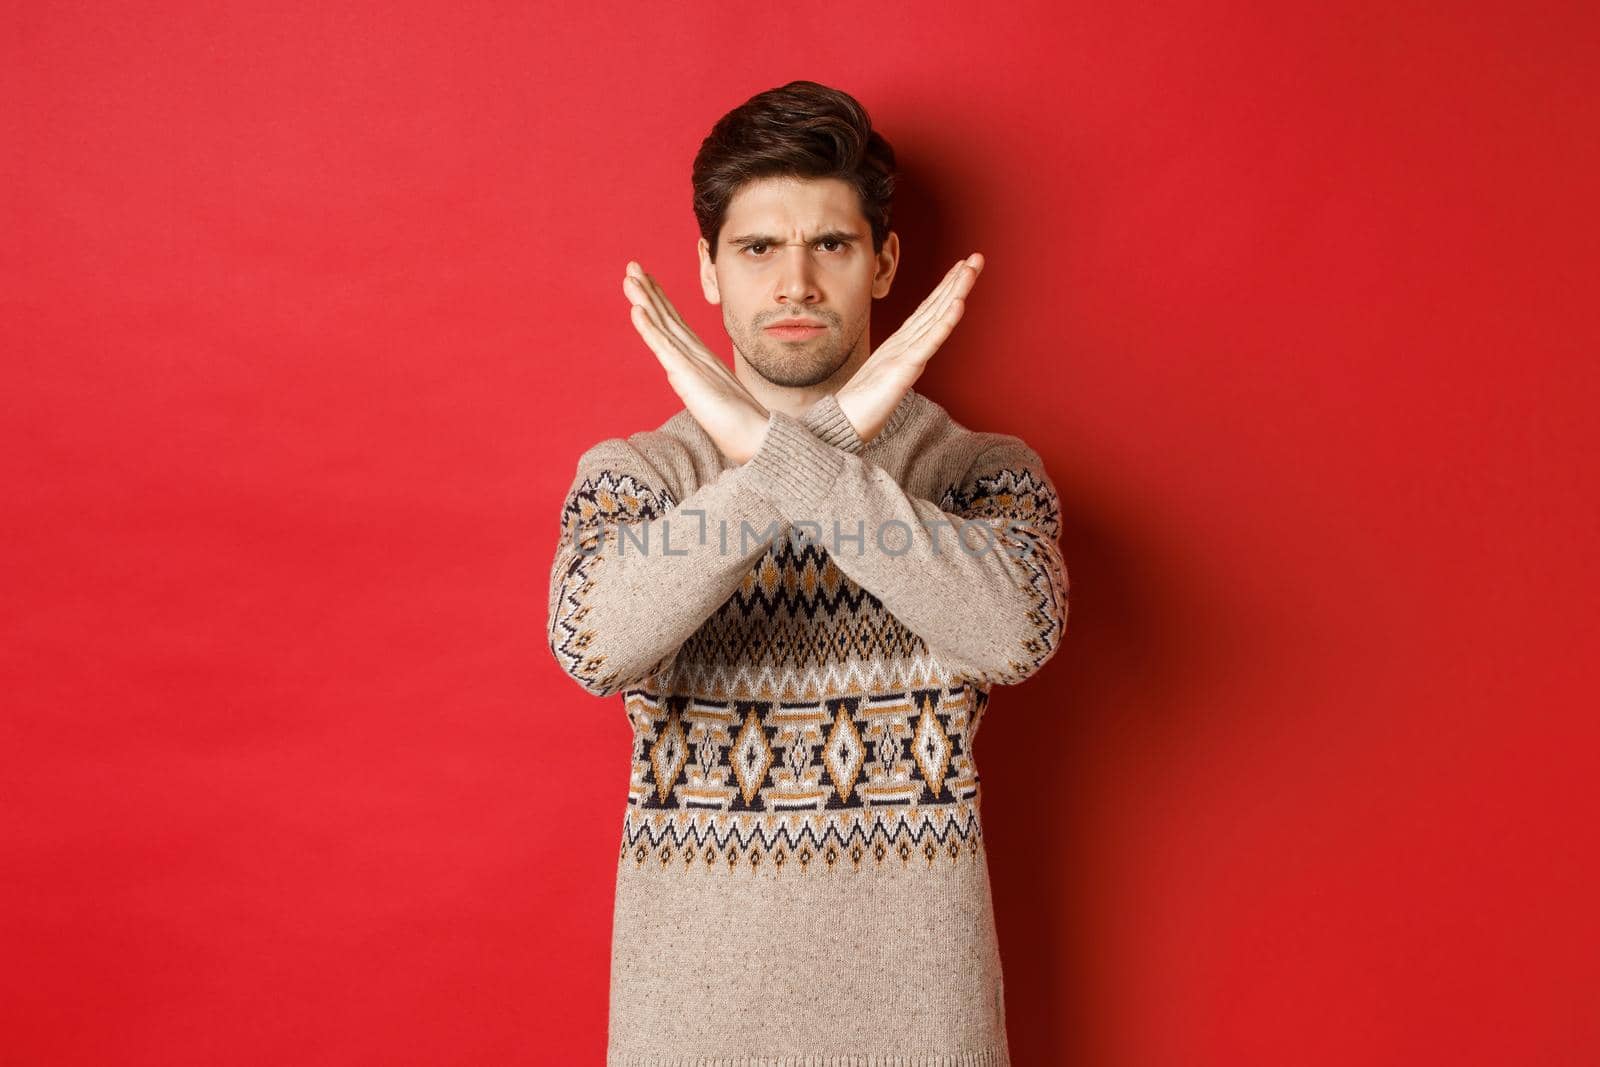 Image of angry and serious handsome man in christmas sweater, telling no or stop, showing cross gesture to restrict you from something, prohibit action, standing over red background.